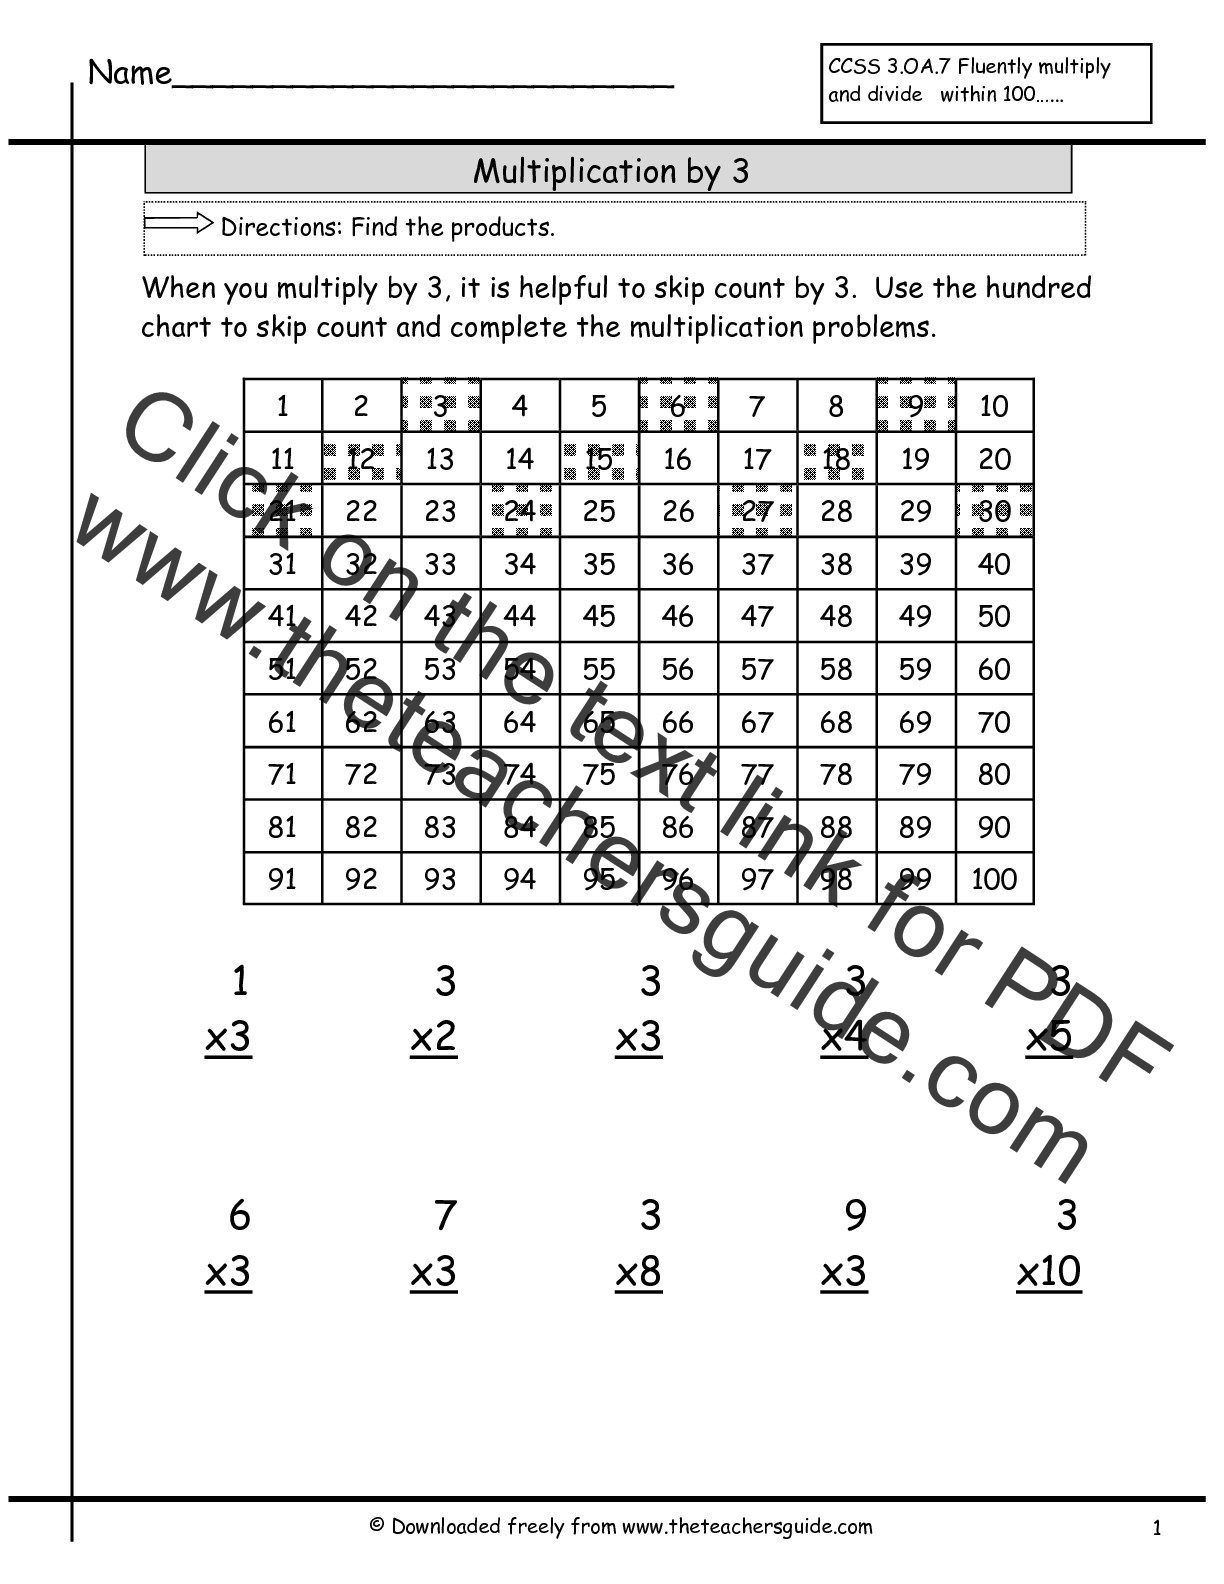 10-best-images-of-multiplication-worksheets-1-12-multiplying-1-to-9-by-2-a-multiplication